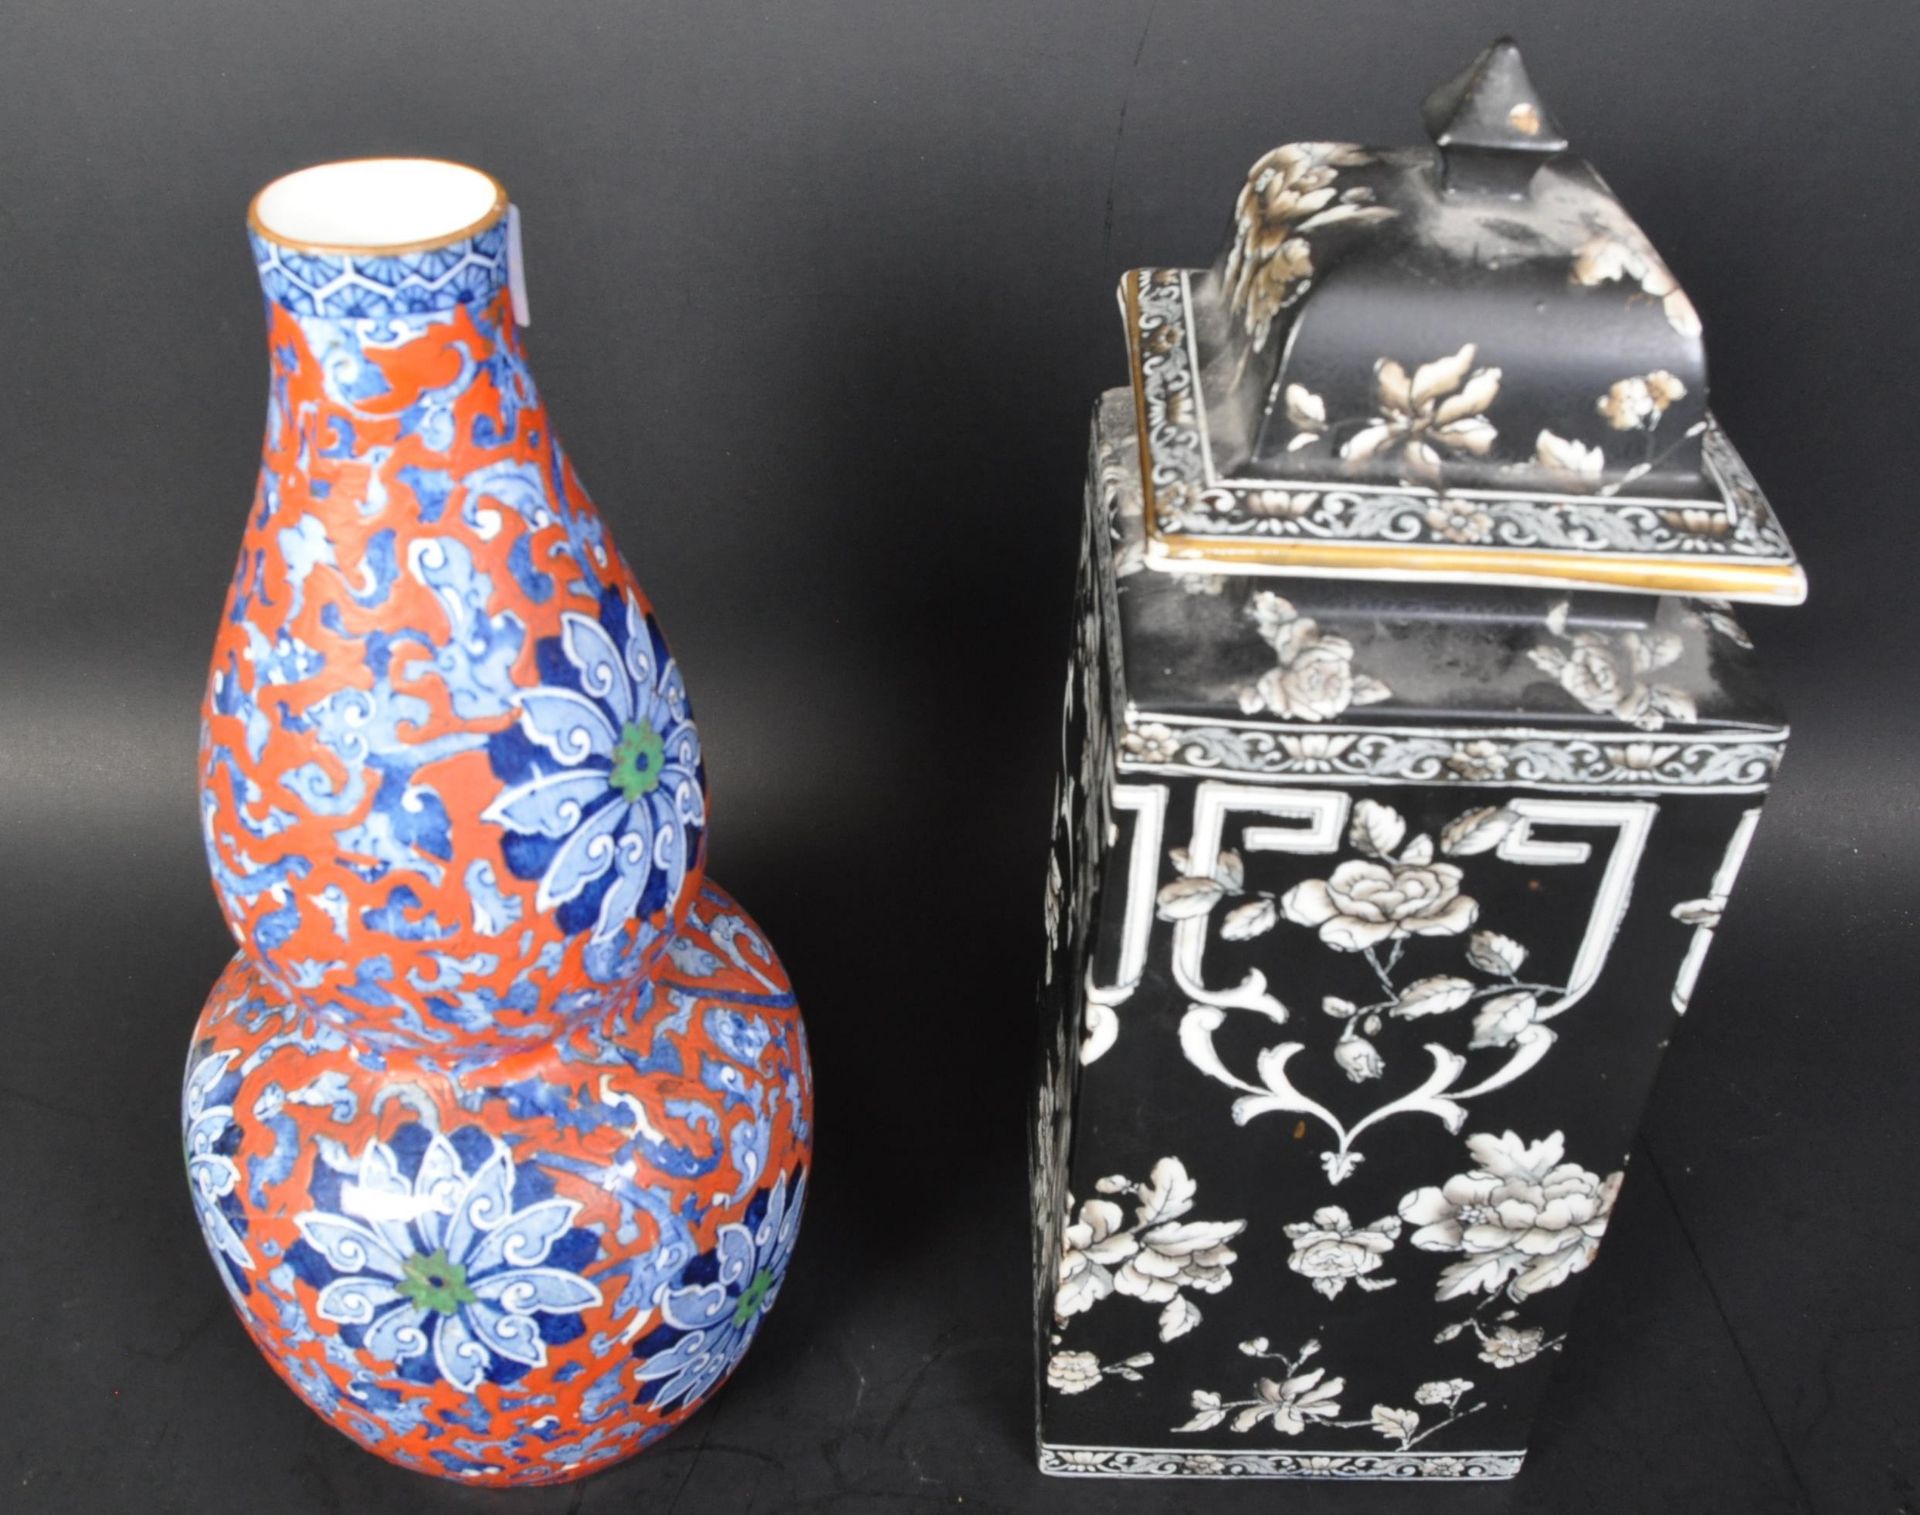 CORONA WARE & CHUNG WOODS AND SONS VASES - Image 2 of 5